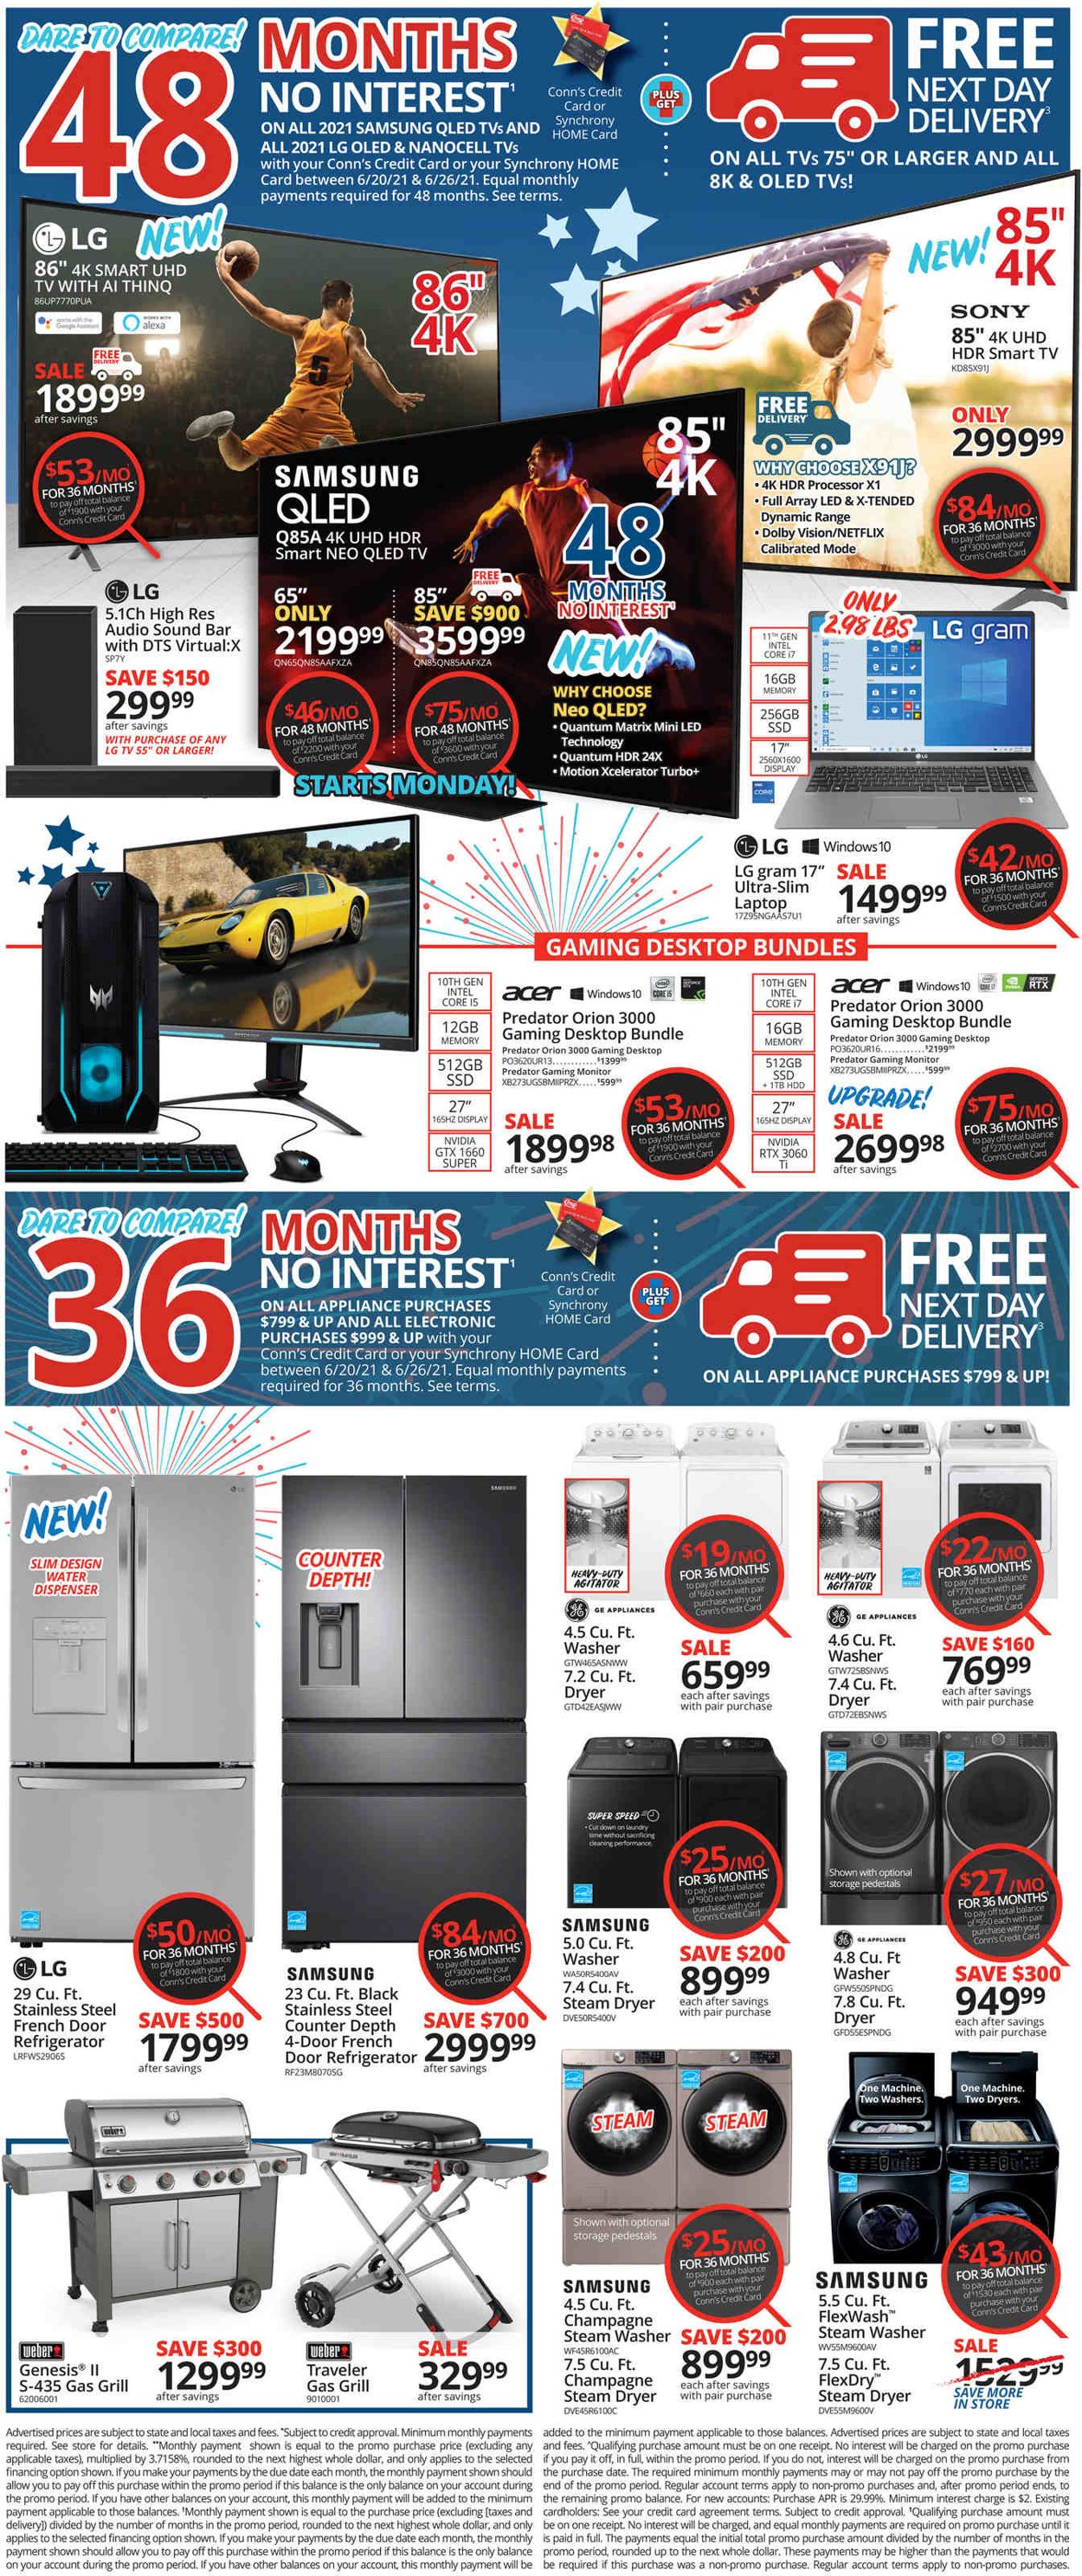 Conn's Home Plus Weekly Ad Circular - valid 06/20-06/26/2021 (Page 2)